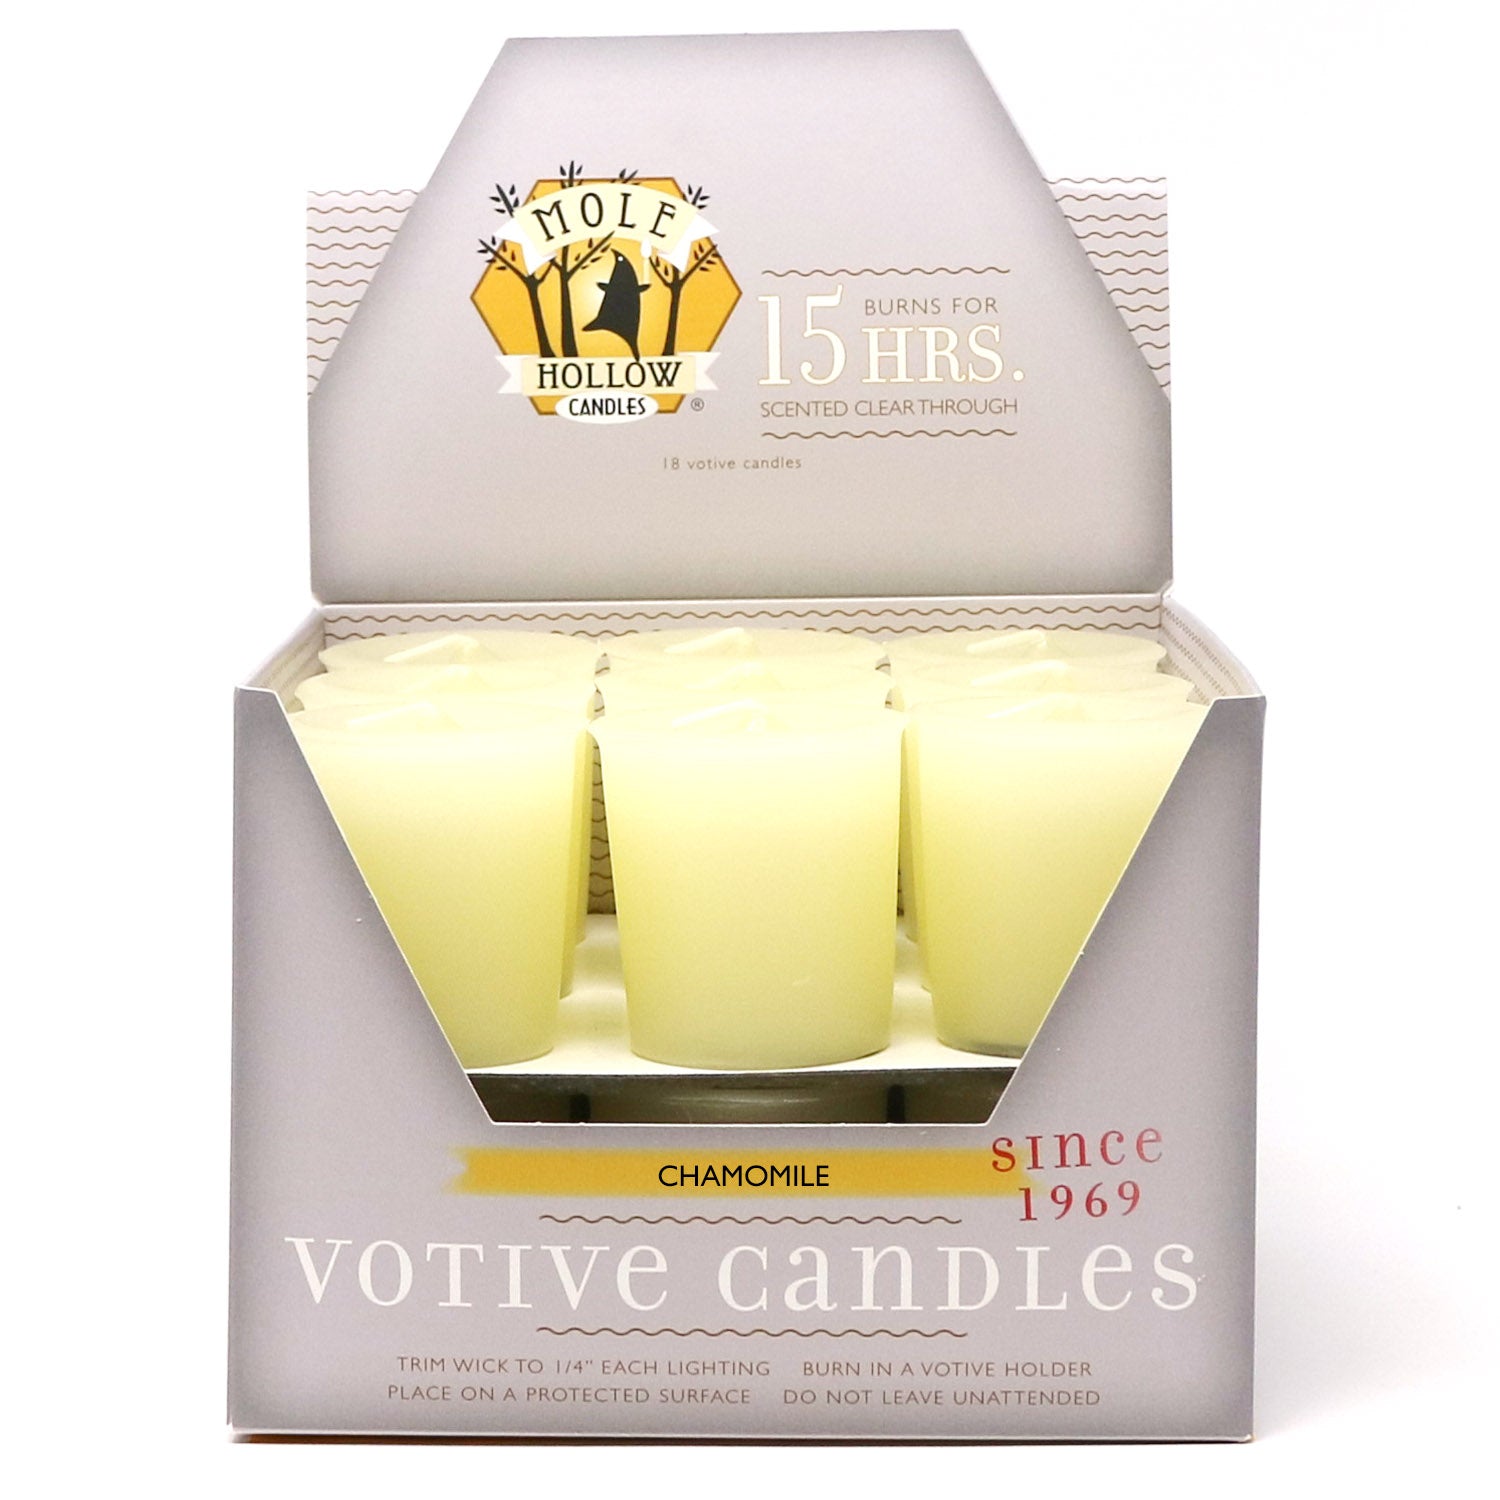 Chamomile scented votive candles, box of 18